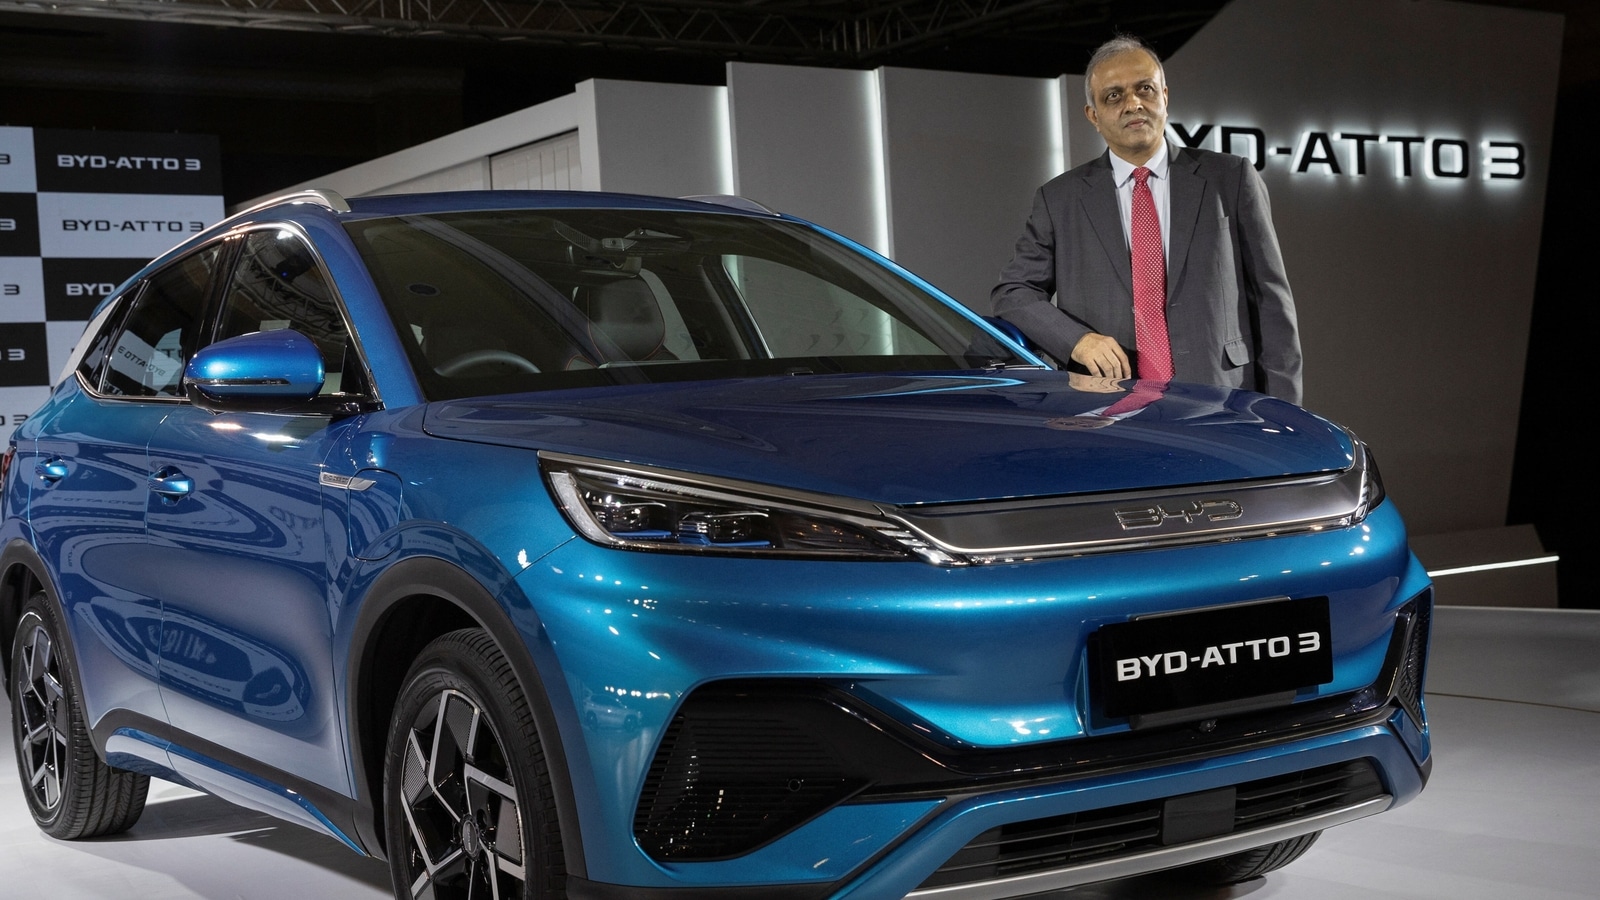 BYD launches Atto 3 in India, book this electric SUV at token amount of